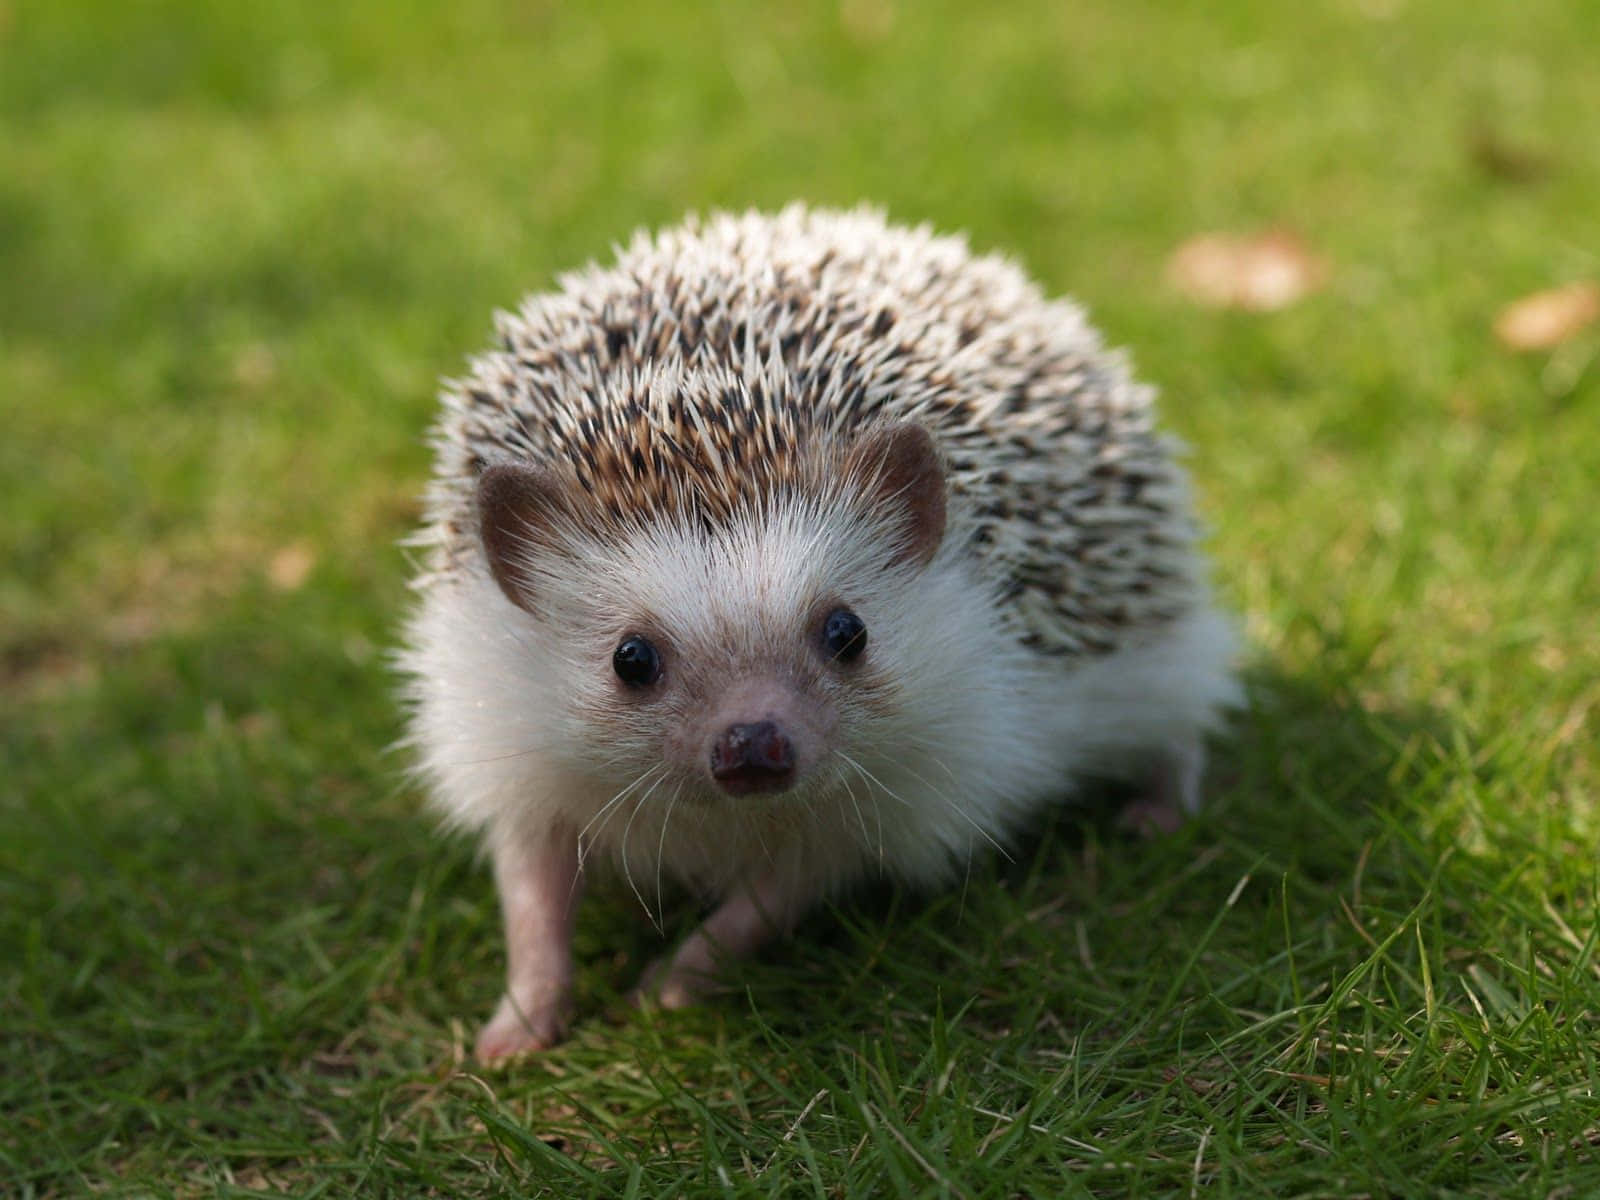 Need an adorable pick-me-up? Check out this cuddly, cute hedgehog! Wallpaper